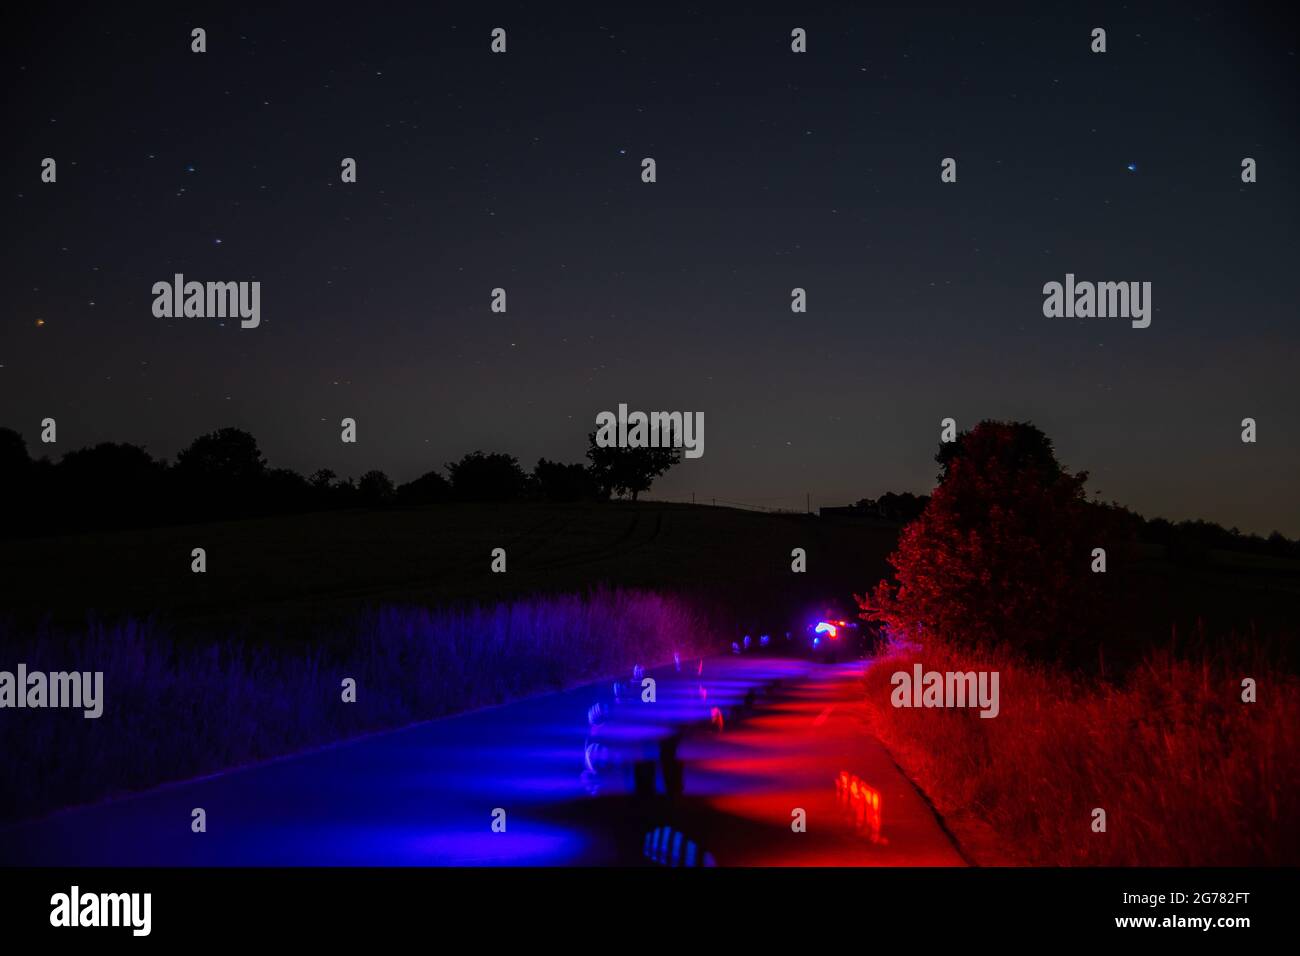 Countryroads illuminated colorfully past midnight Stock Photo